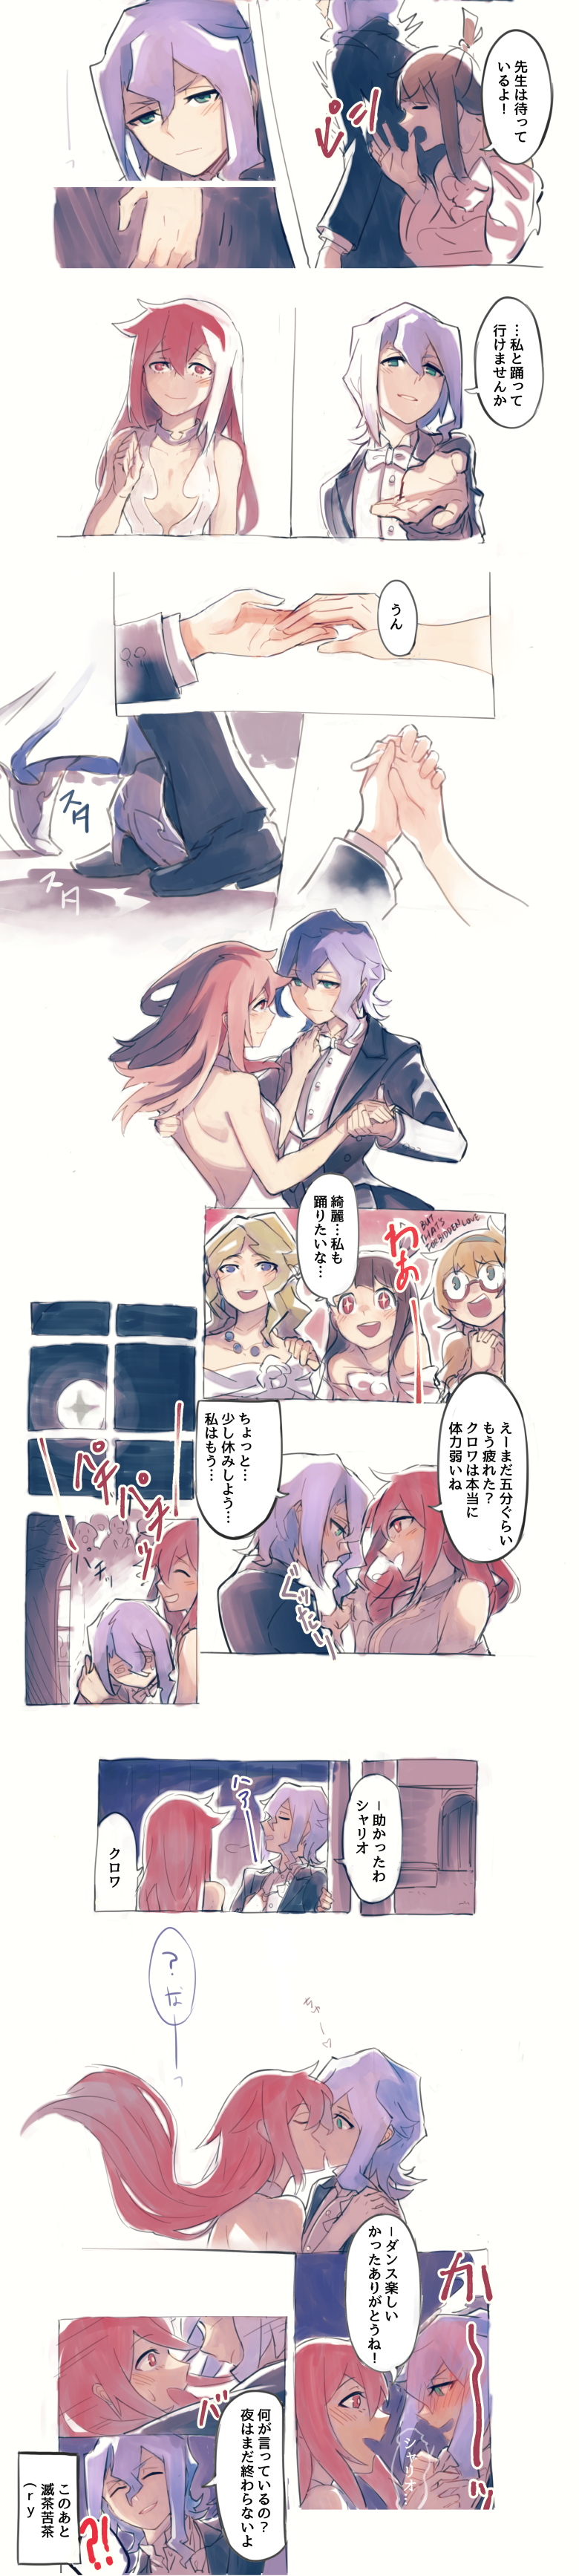 5girls absurdres adapted_costume blonde_hair blue_eyes blush comic croix_meridies dancing diana_cavendish dress glasses green_eyes highres holding_hands kagari_atsuko kiss little_witch_academia long_hair long_image lotte_jansson multiple_girls ponytail purple_hair ranguage red_eyes red_hair shiny_chariot tall_image they_had_lots_of_sex_afterwards translation_request ursula_charistes vento yuri